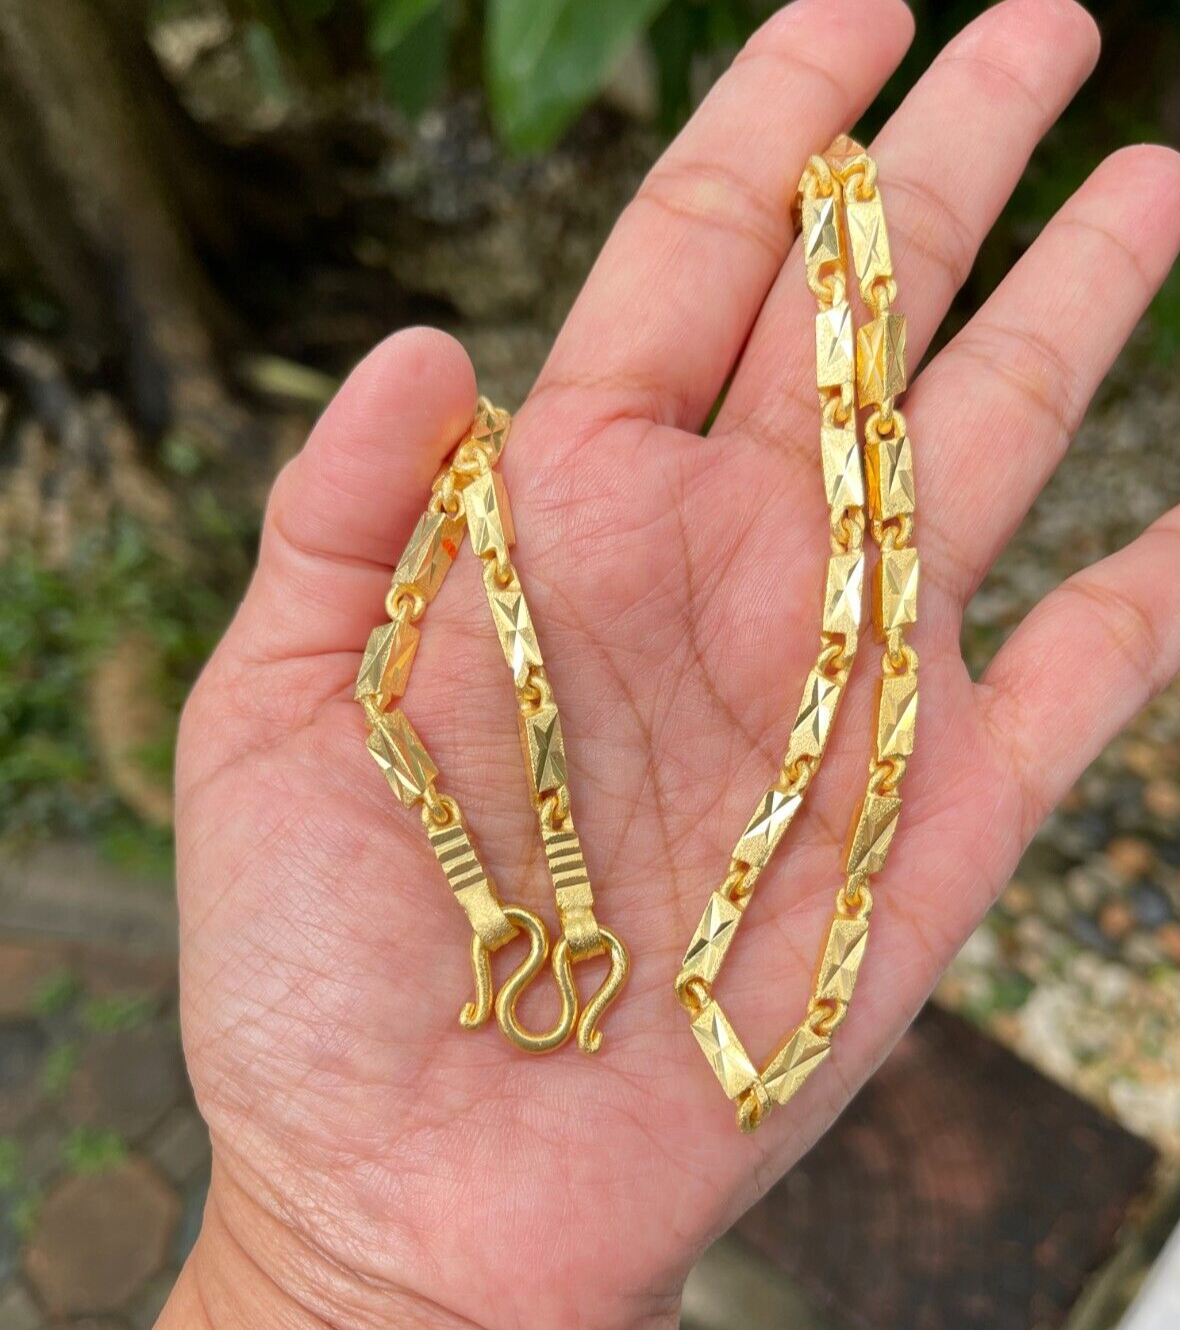 22K 24K Thai Baht Yellow Gold GP Filled Necklace 24 inch 59 Gram Jewelry  4.5 MM